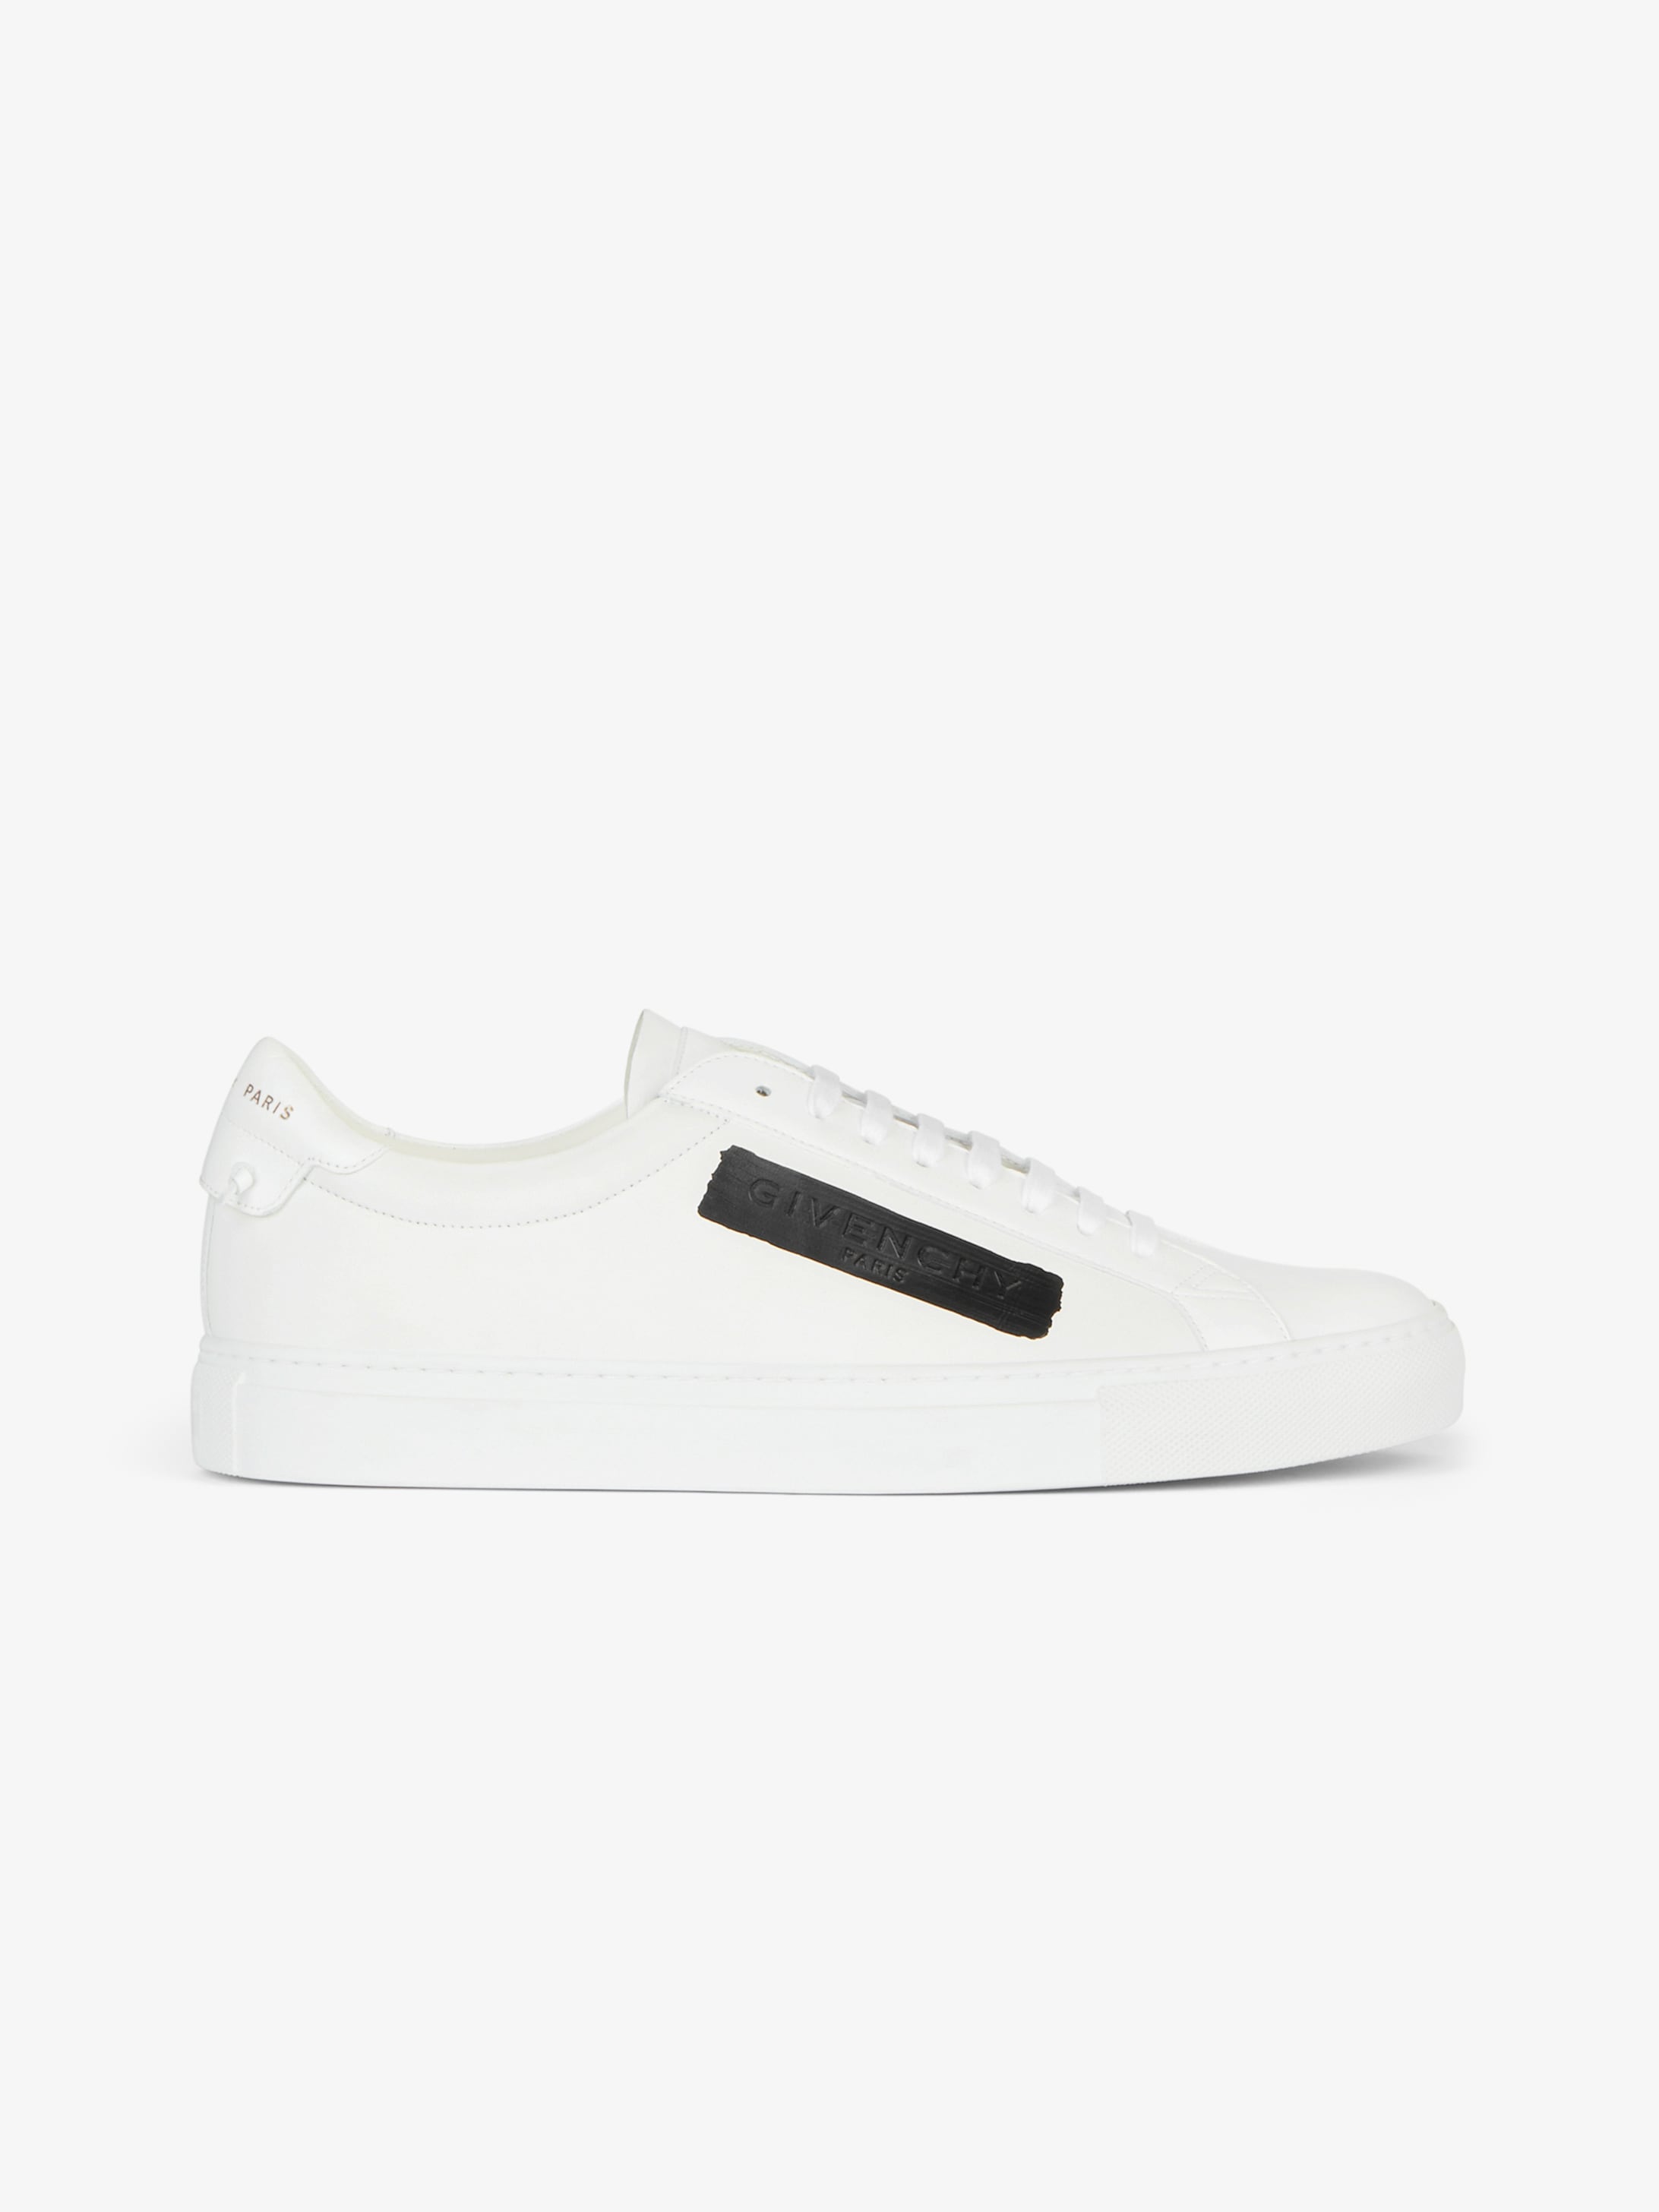 GIVENCHY sneakers in leather with latex 